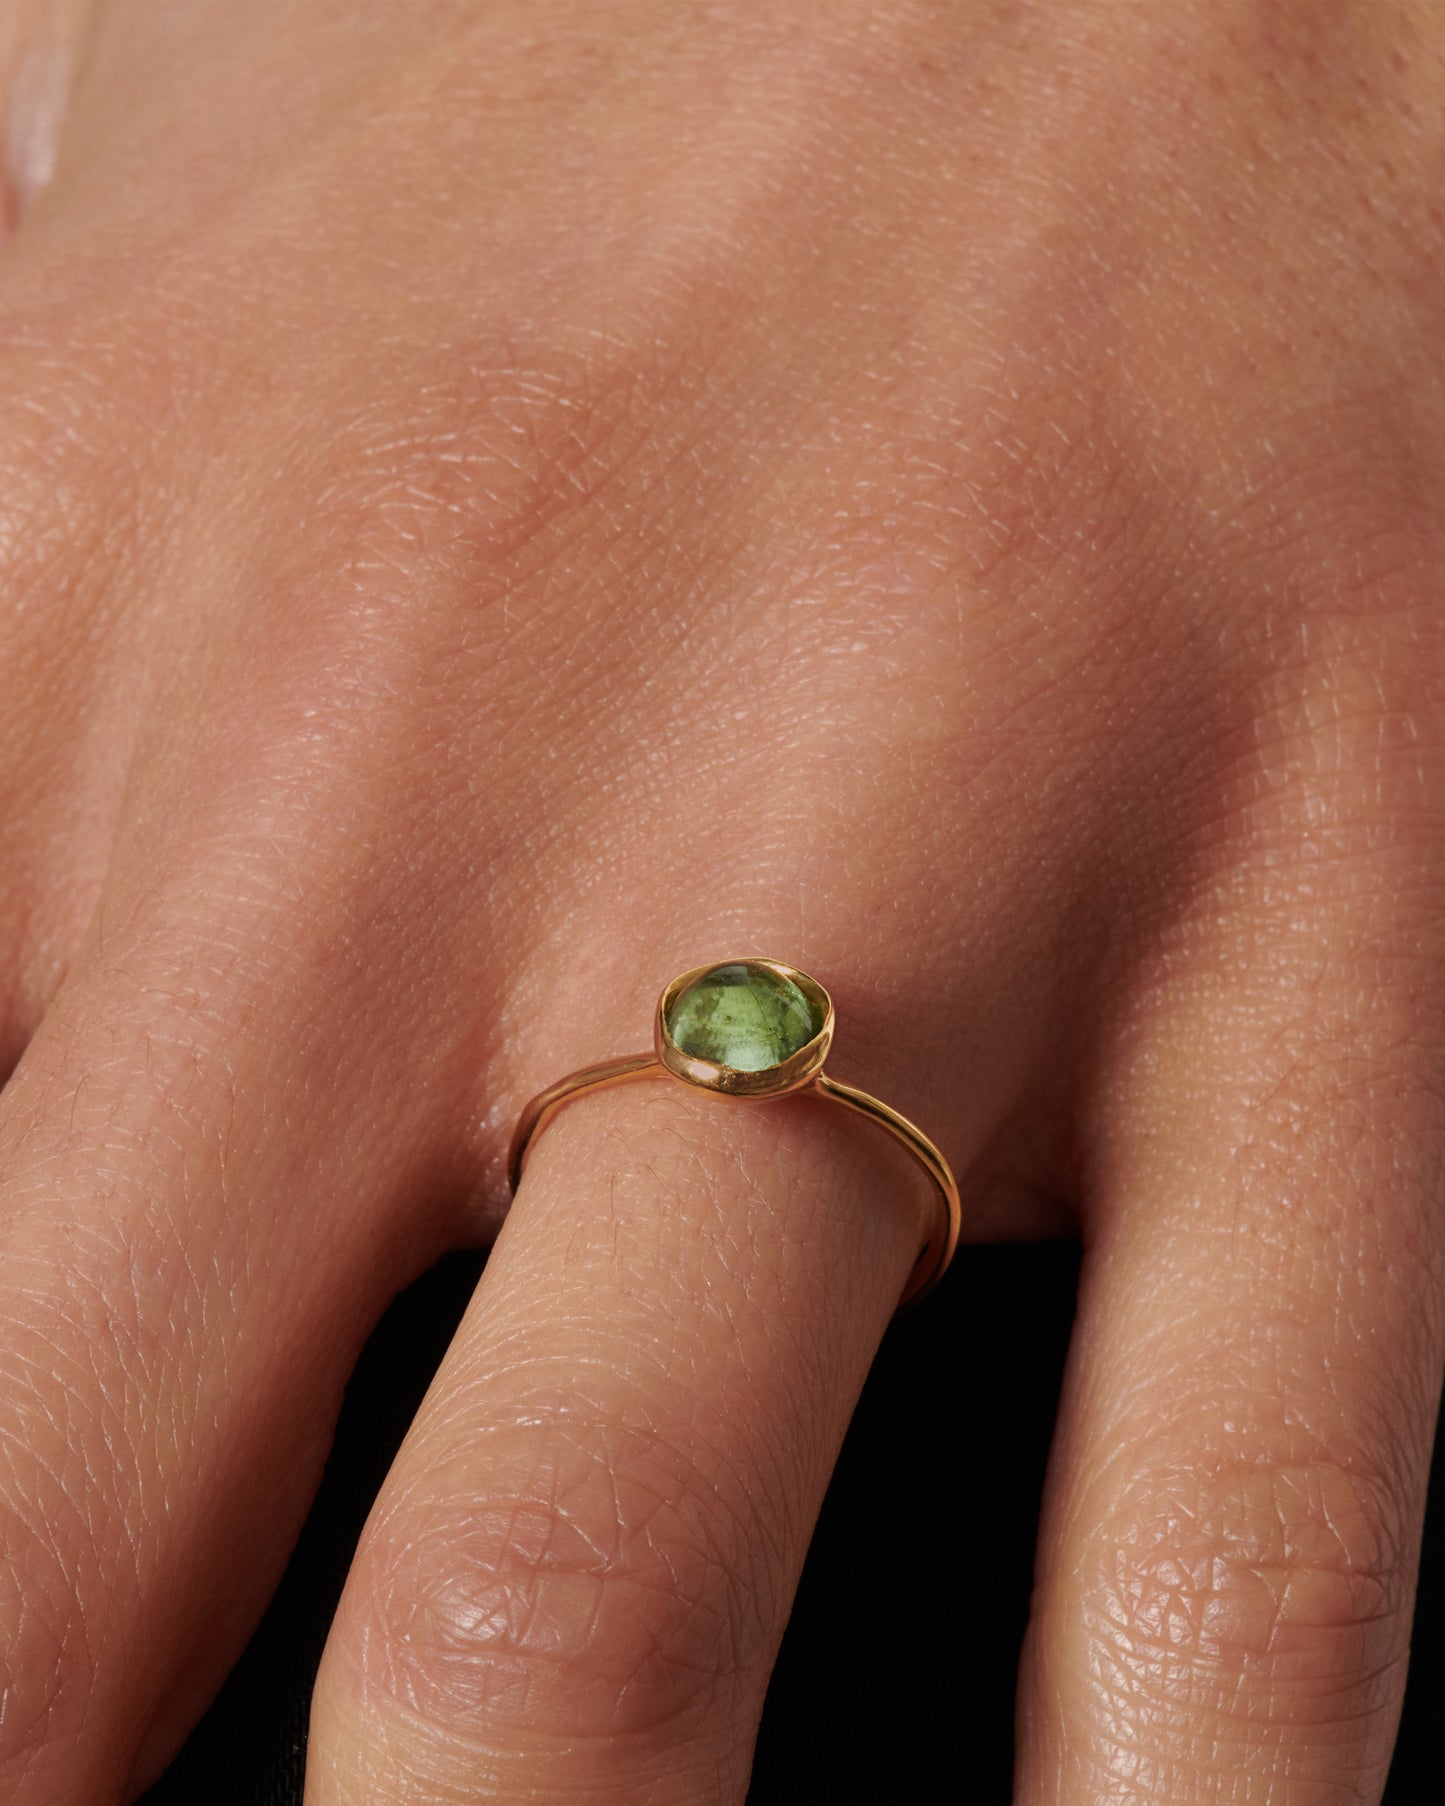 A sage-y green tourmaline cabochon is set in a bezel setting atop this ring.